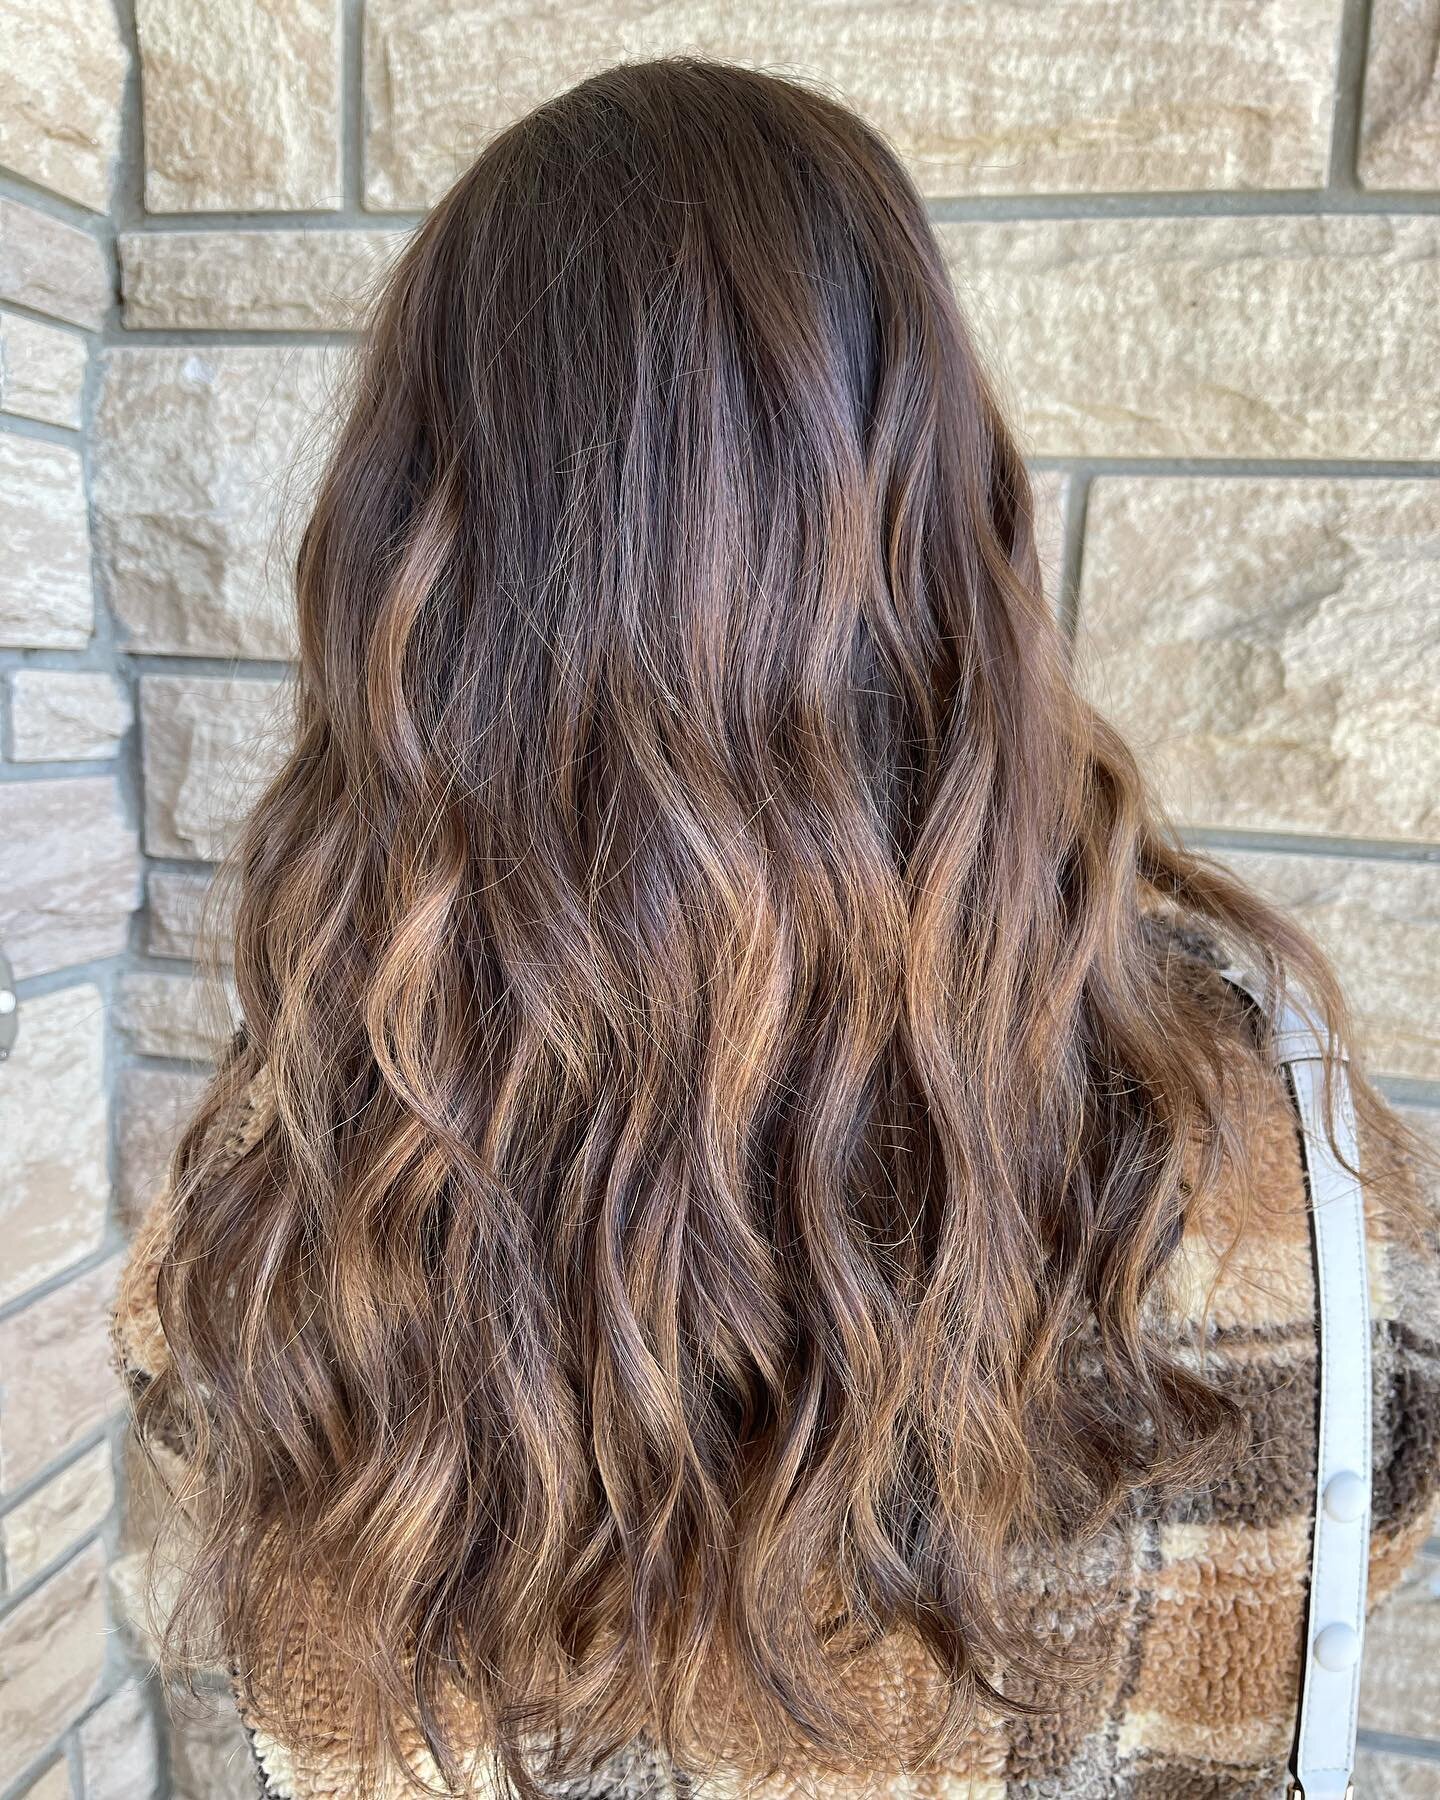 And you were thinking blonde for spring? 🤎🤎&bull;
&bull;
&bull;
&bull;
#dimensionalbrunette #brunette #springhair #dimensionalcolor #livedinhair #hair #hairbydrea #andreaosztrohair #brantfordhair